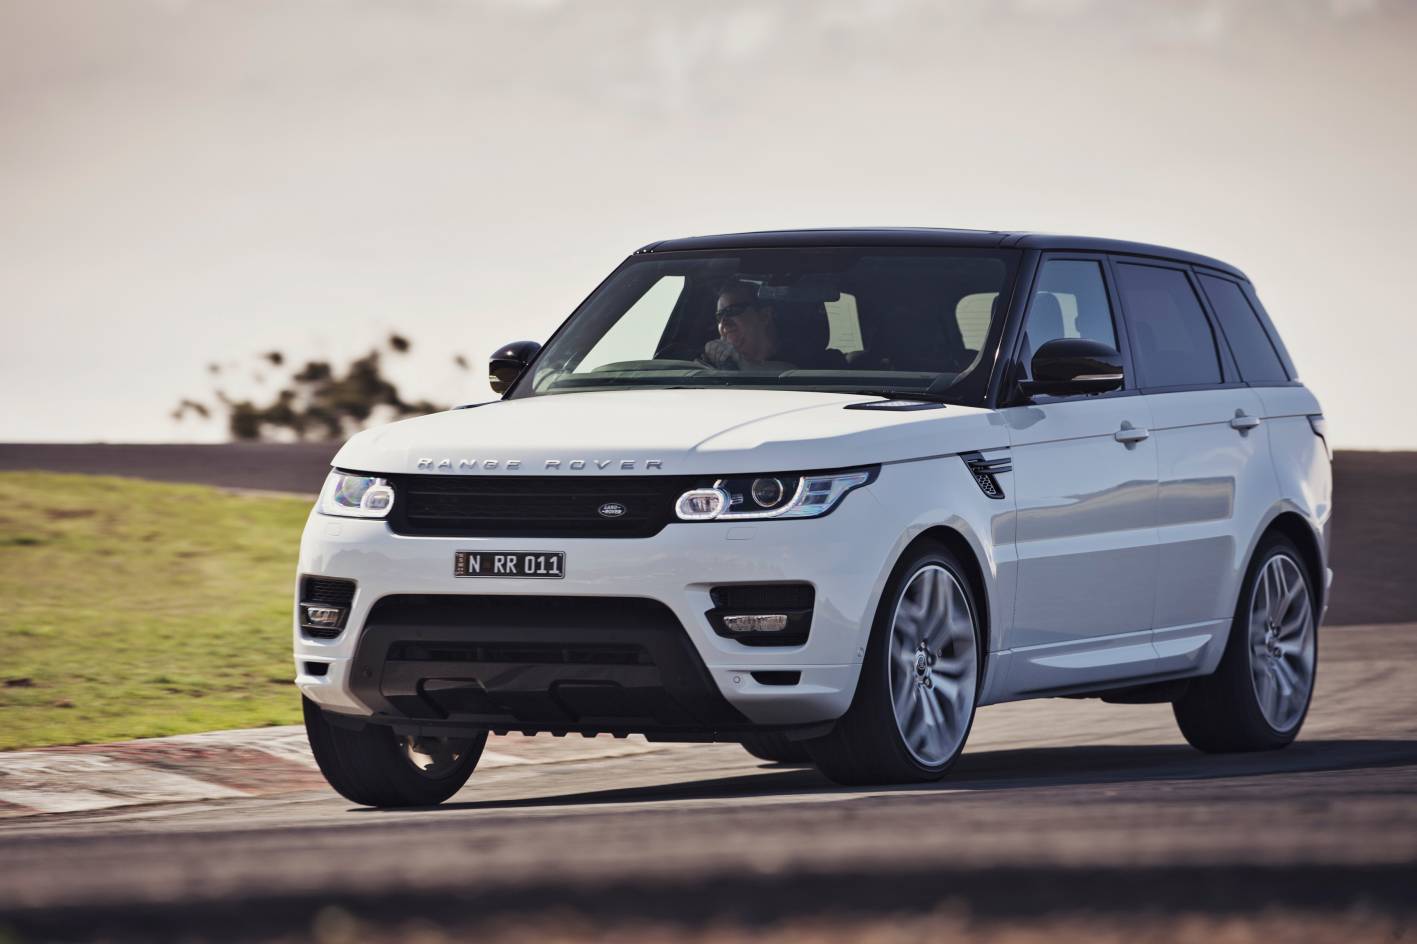 Australian vehicle sales for February 2014 – Land Rover shines